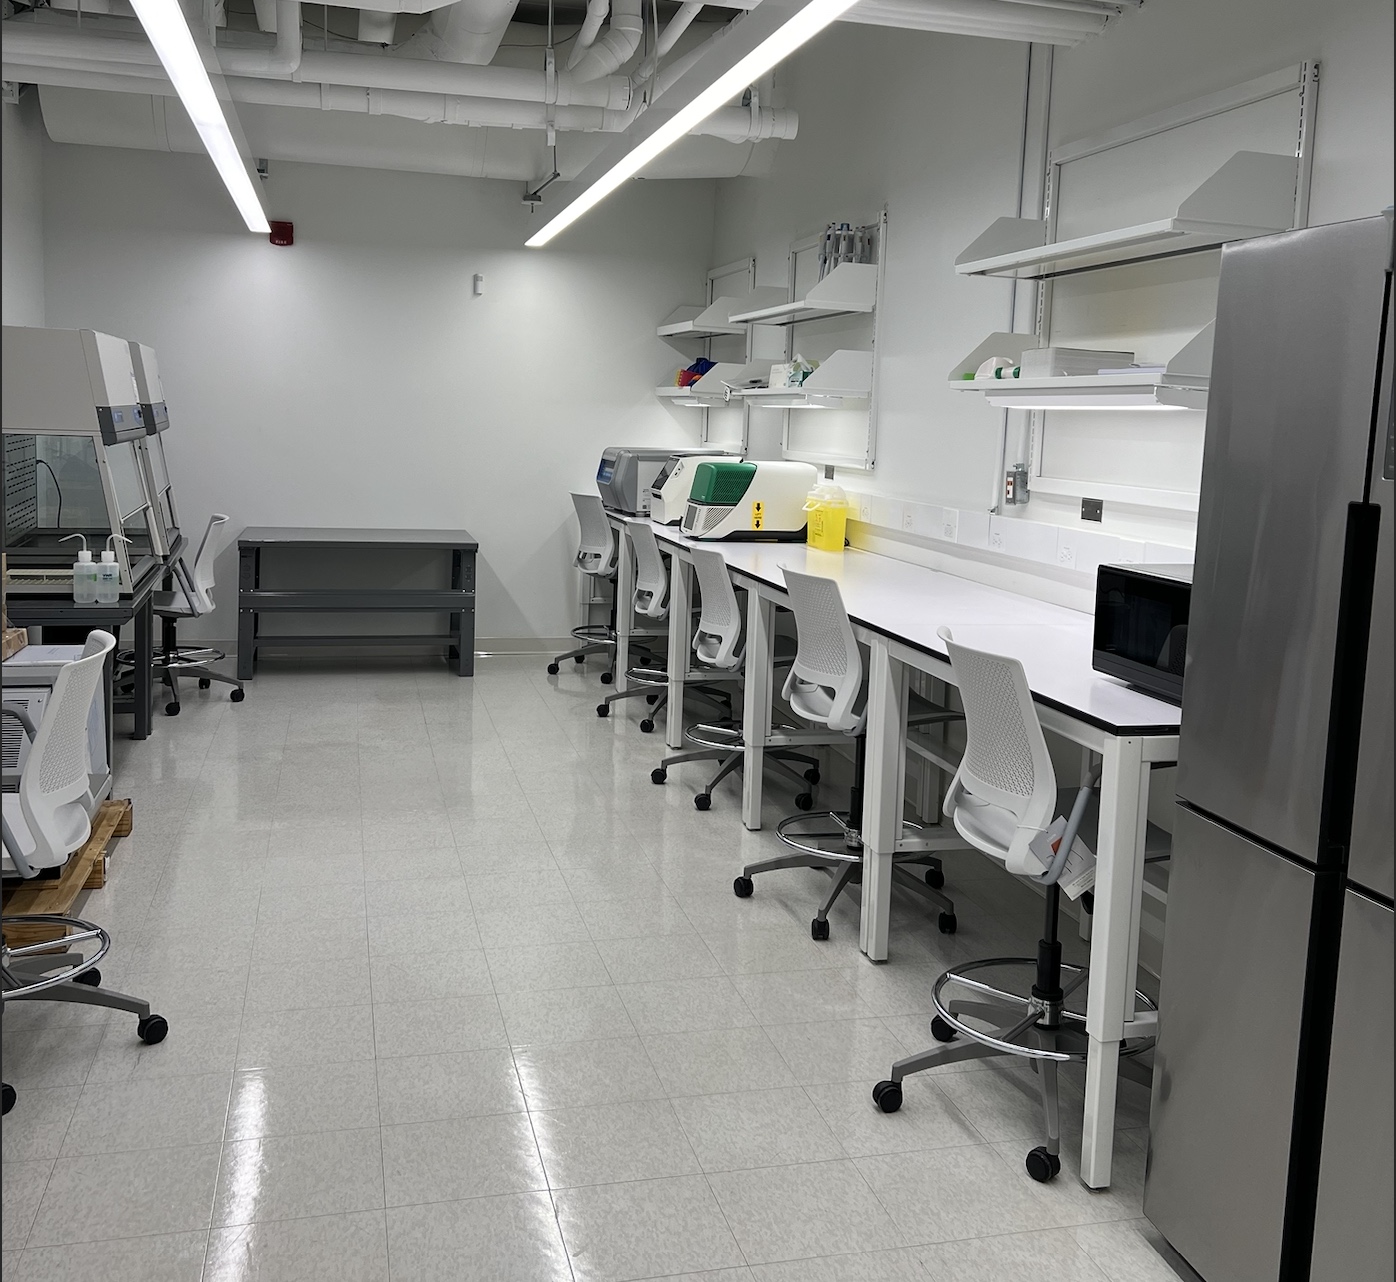 This is an image of a biology laboratory. The lab contains workbenches and imaging equipment. 